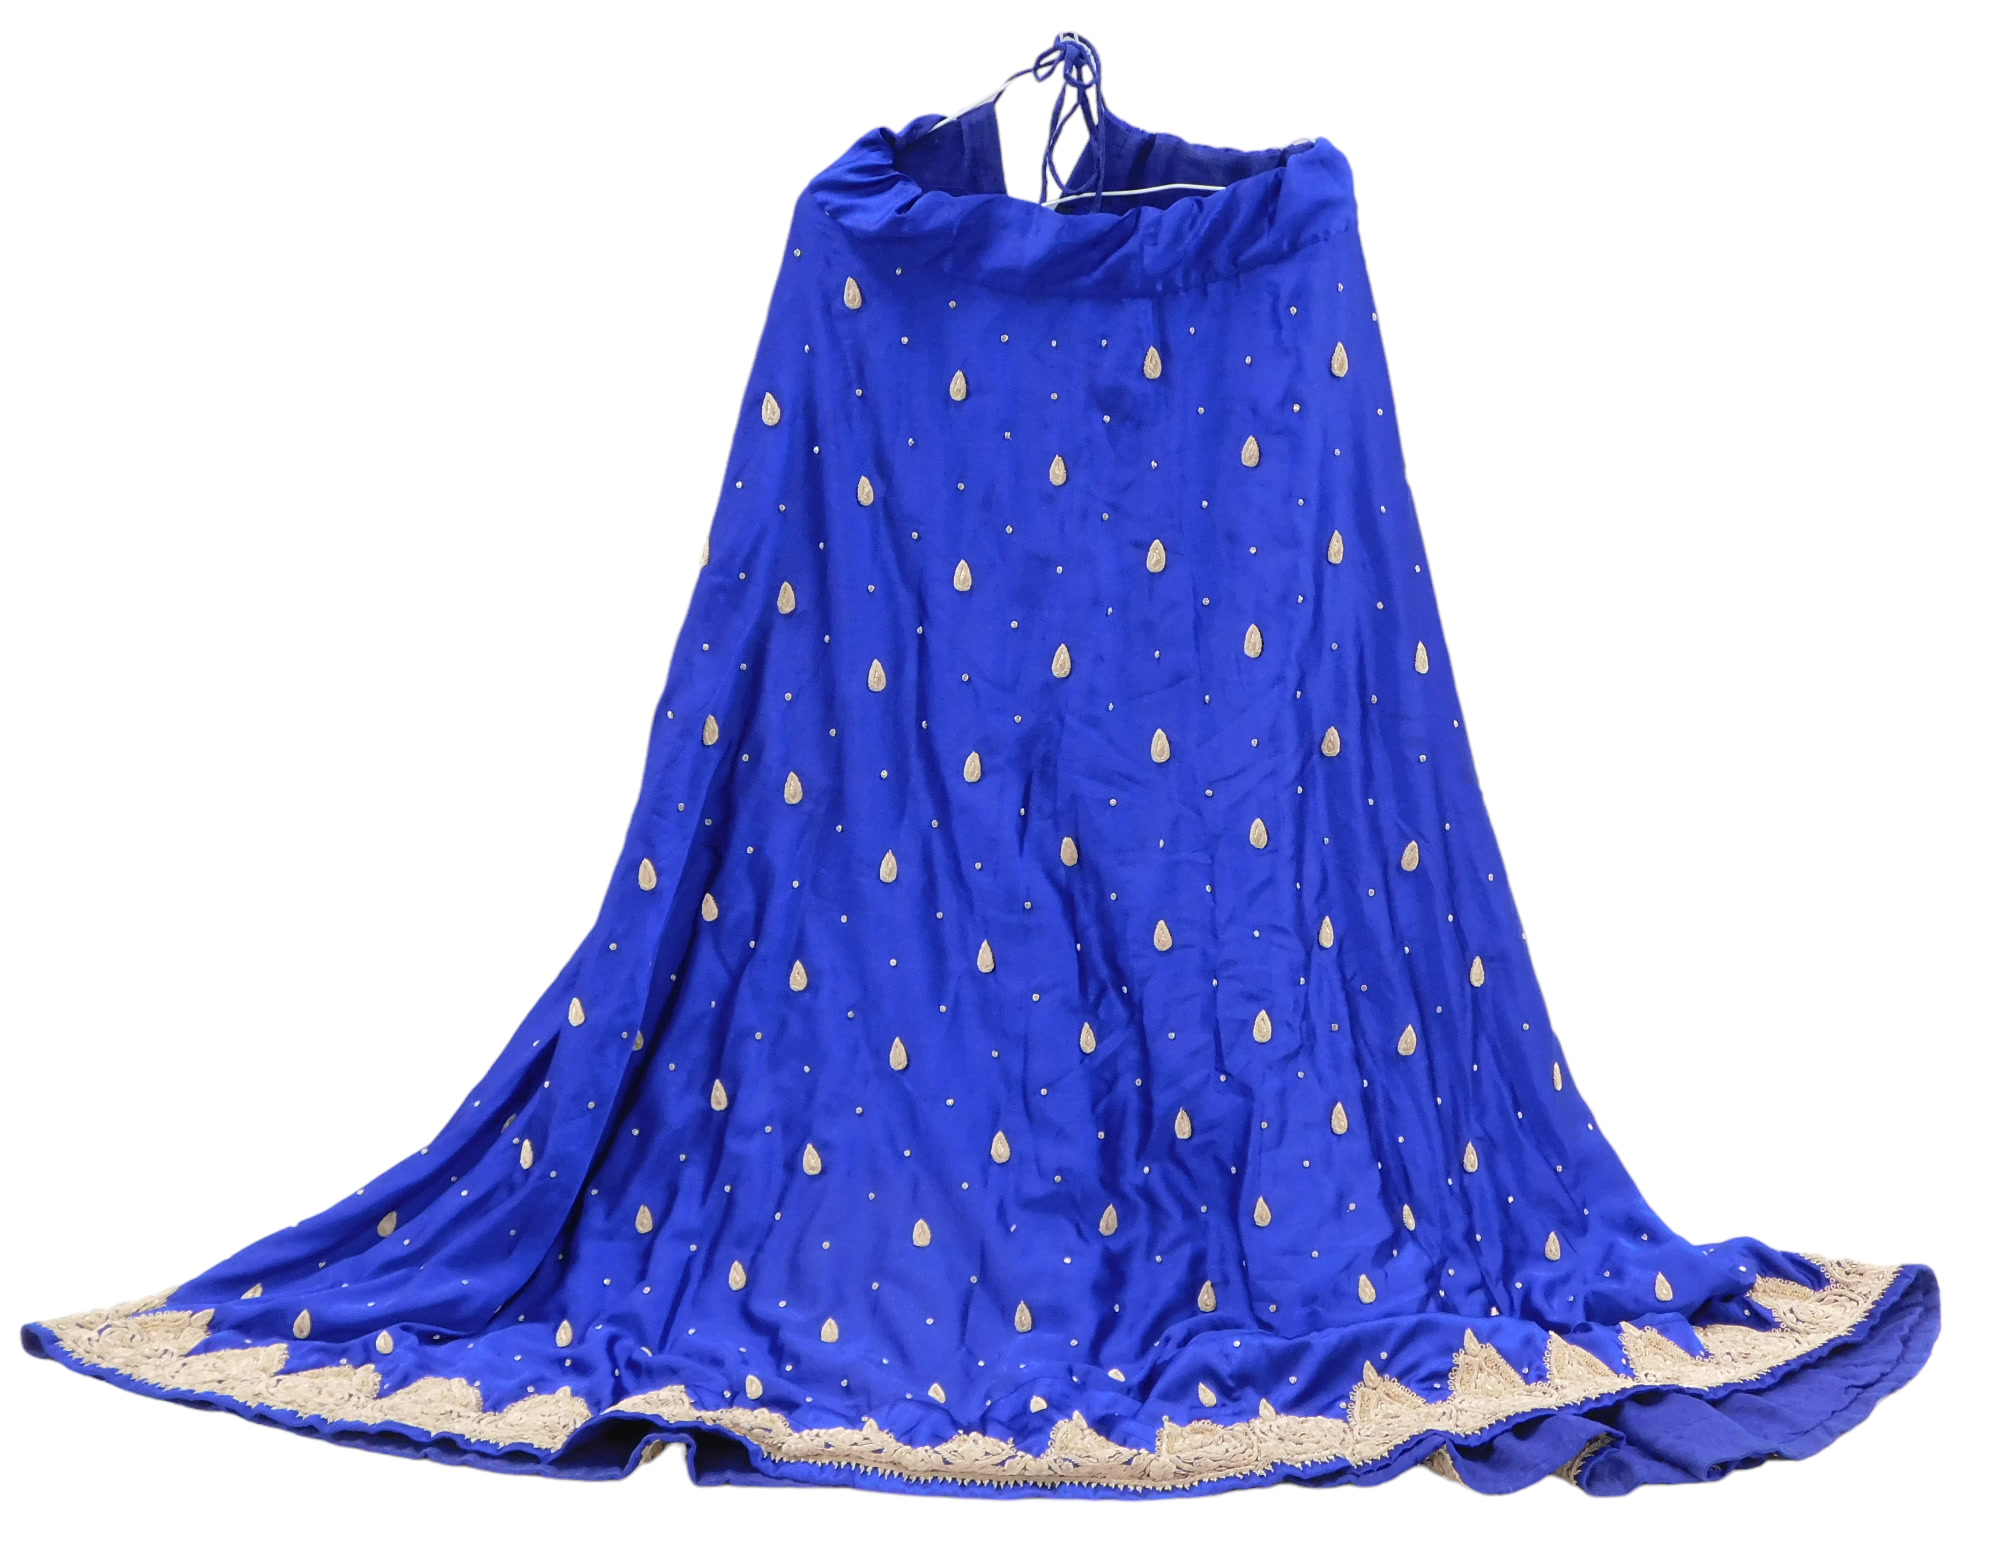 A blue satin ladies dress, embroidered with silver thread.